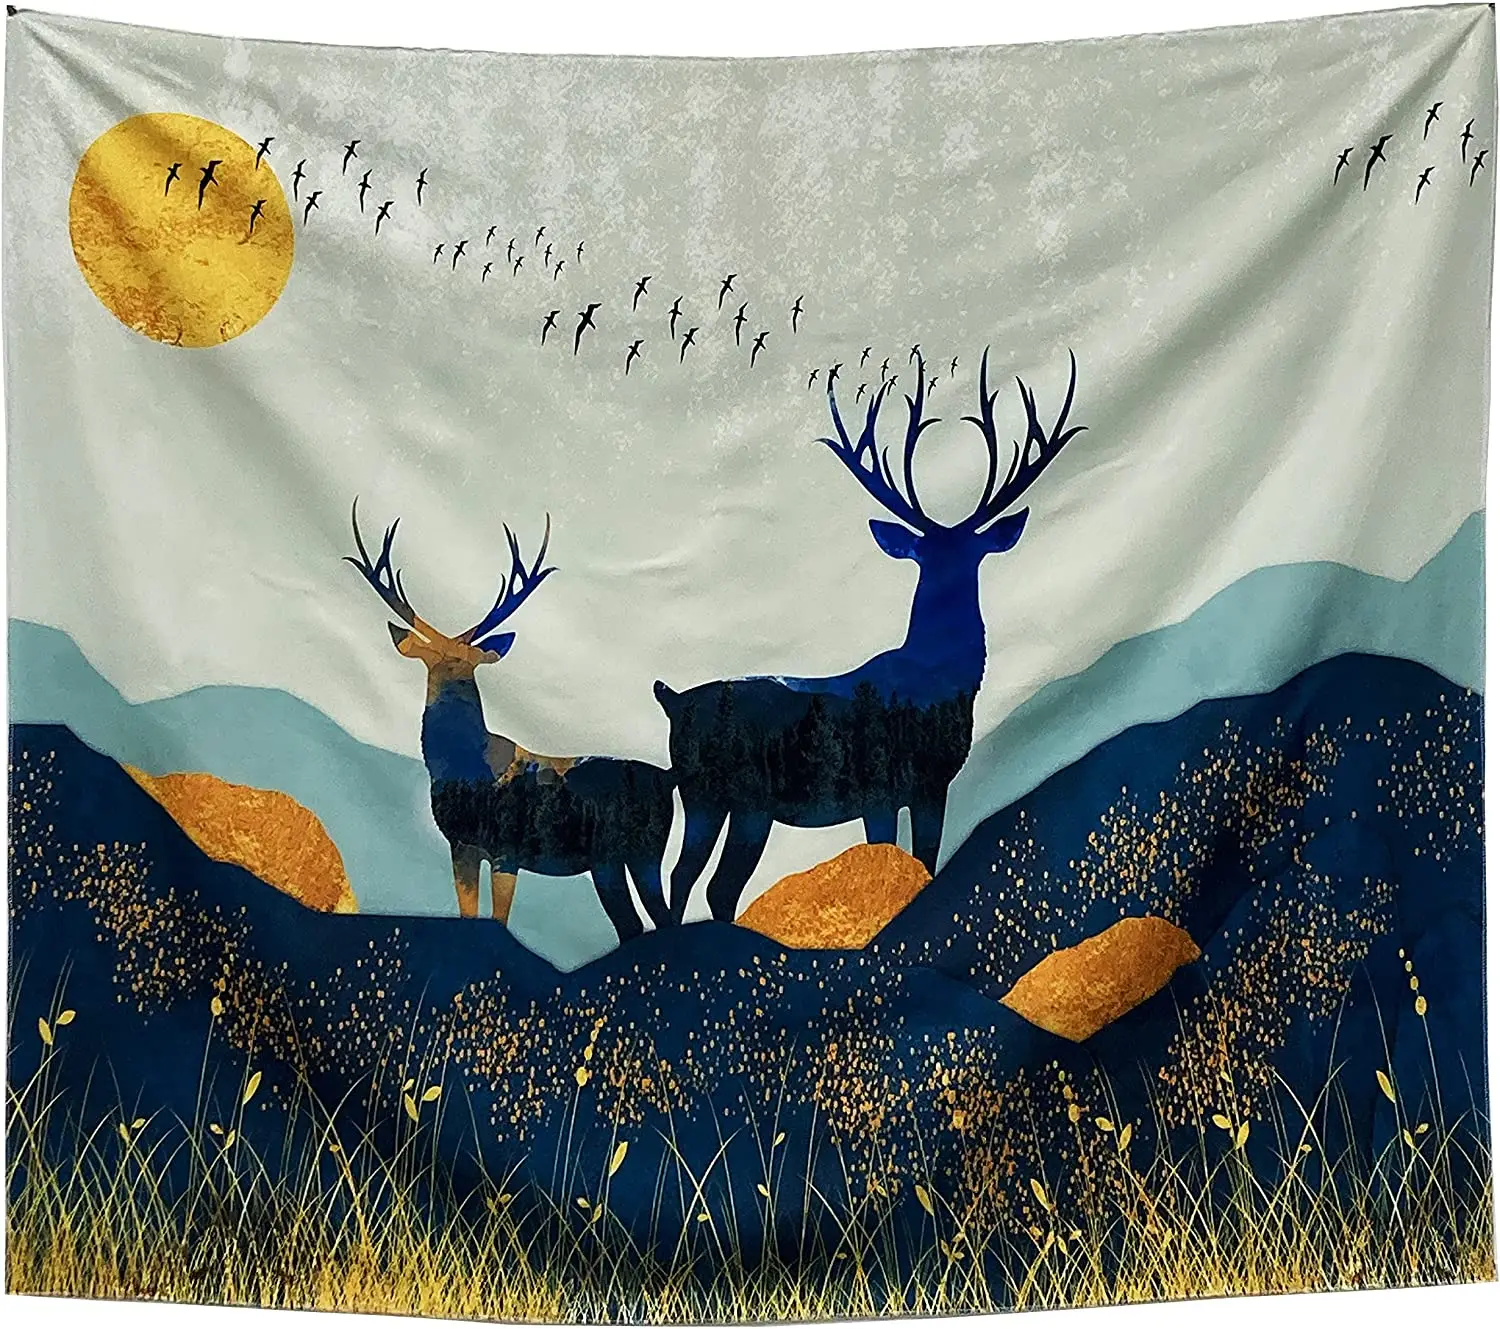 

Elk in Moutain Tapestry Sun Tapestry Wall Hanging with Hanging Accessories for Home Dorm Wall Art Decor tapestry wall hanging